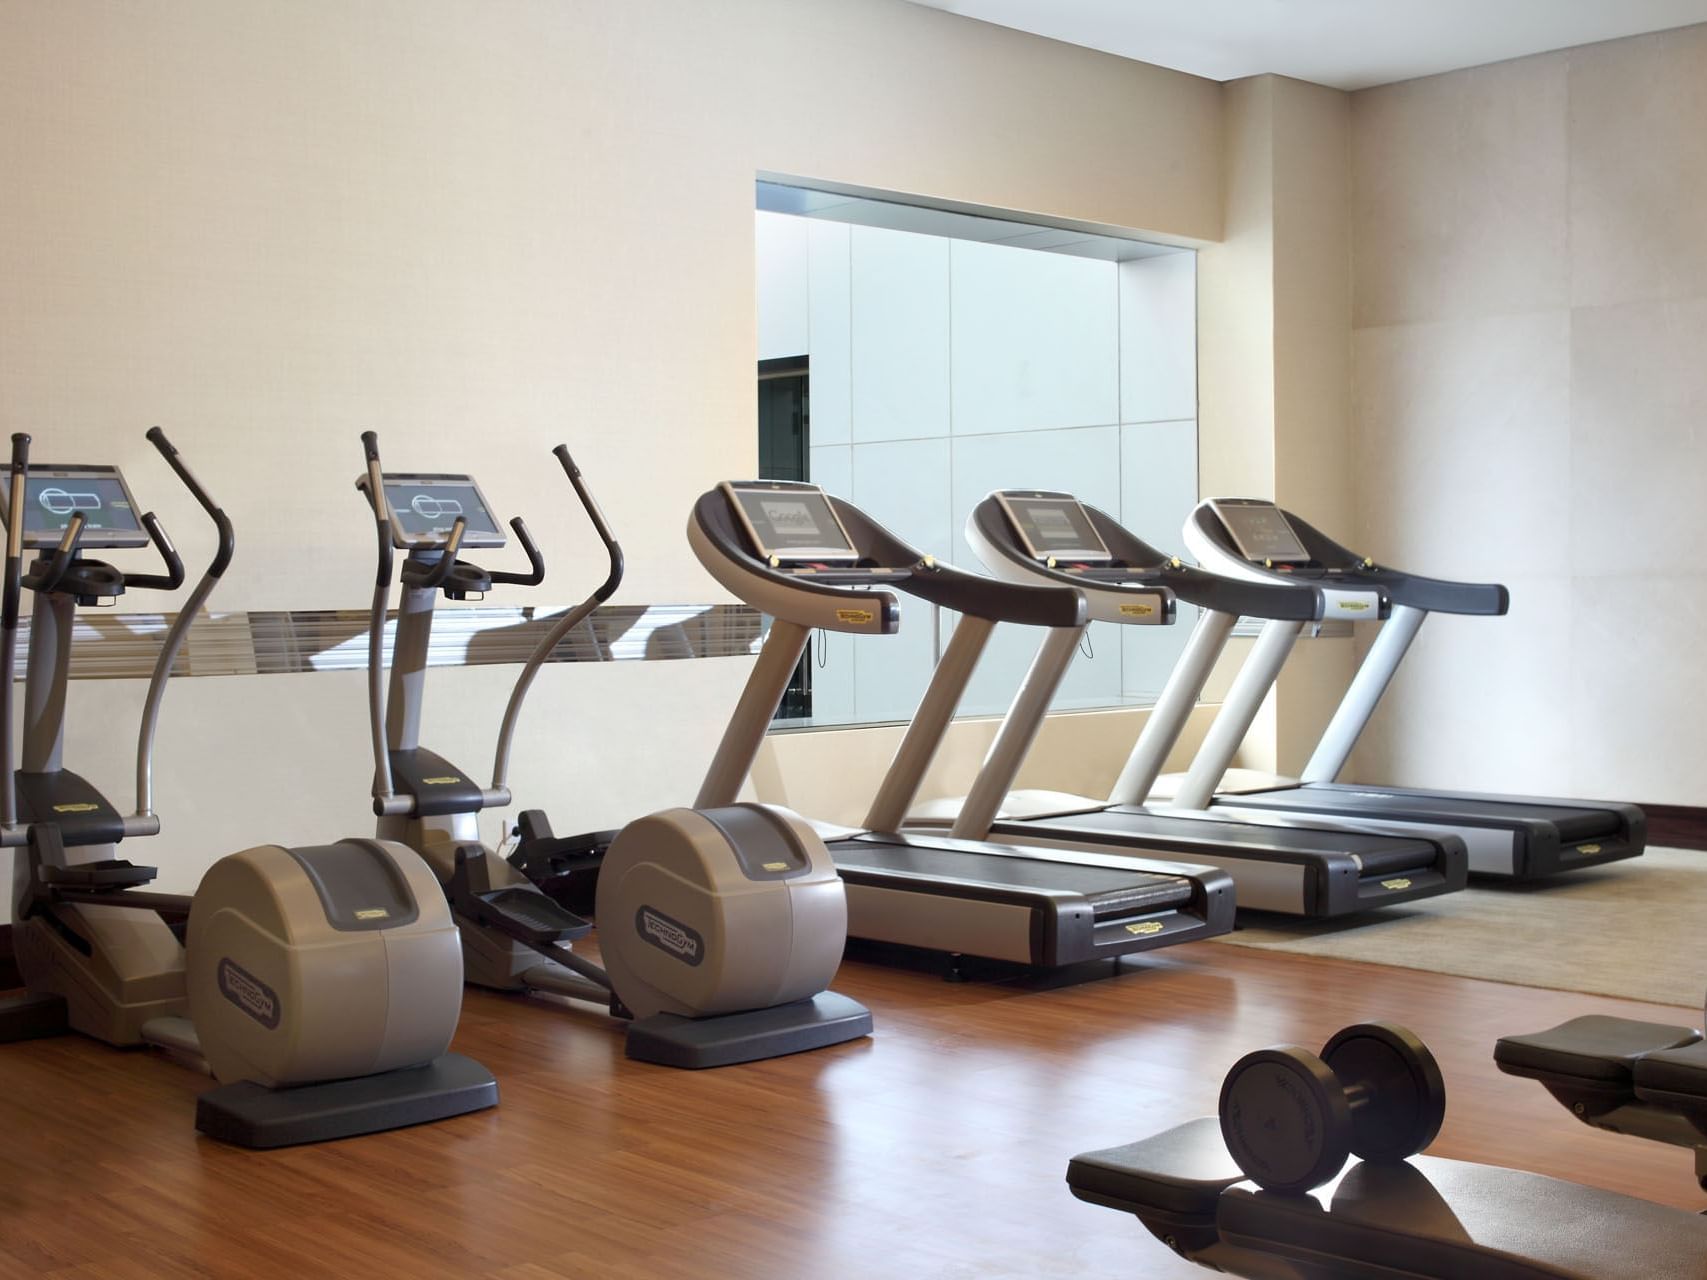 Exercise machines in the Gym with wooden floors at Po Hotel Semarang